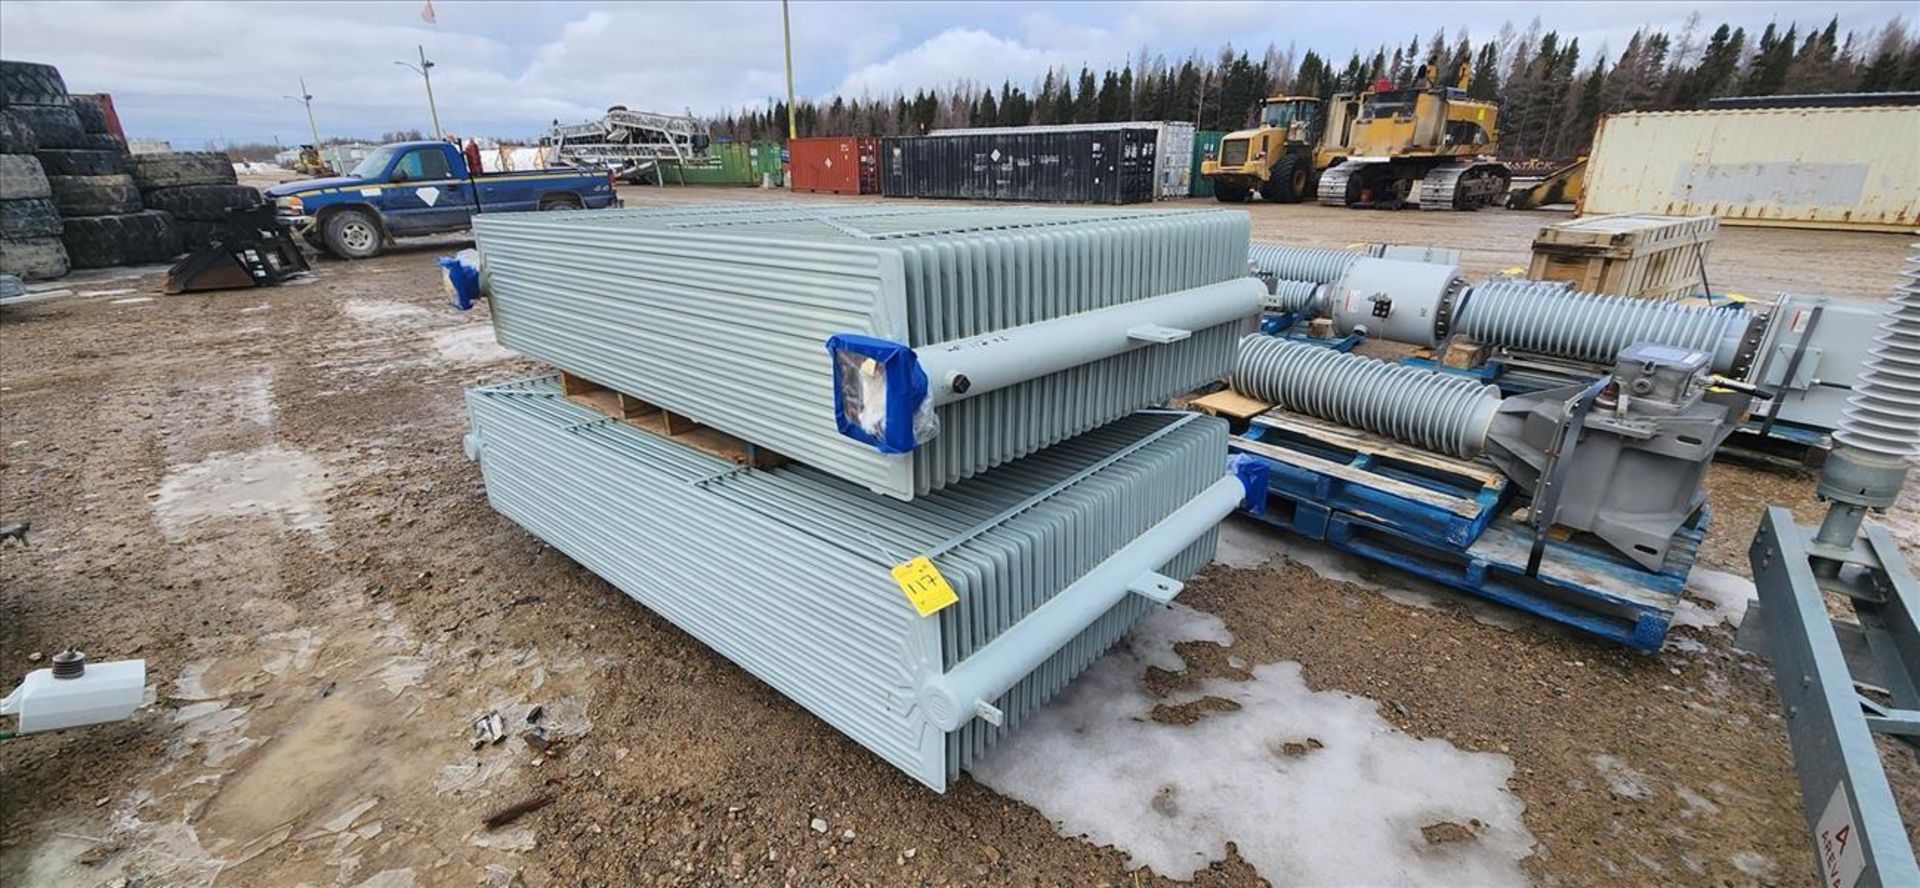 (2) ATP radiators, approx. 20 in. x 101 in. x 57 in. height (Asset Location: Hallnor Yard) {Day